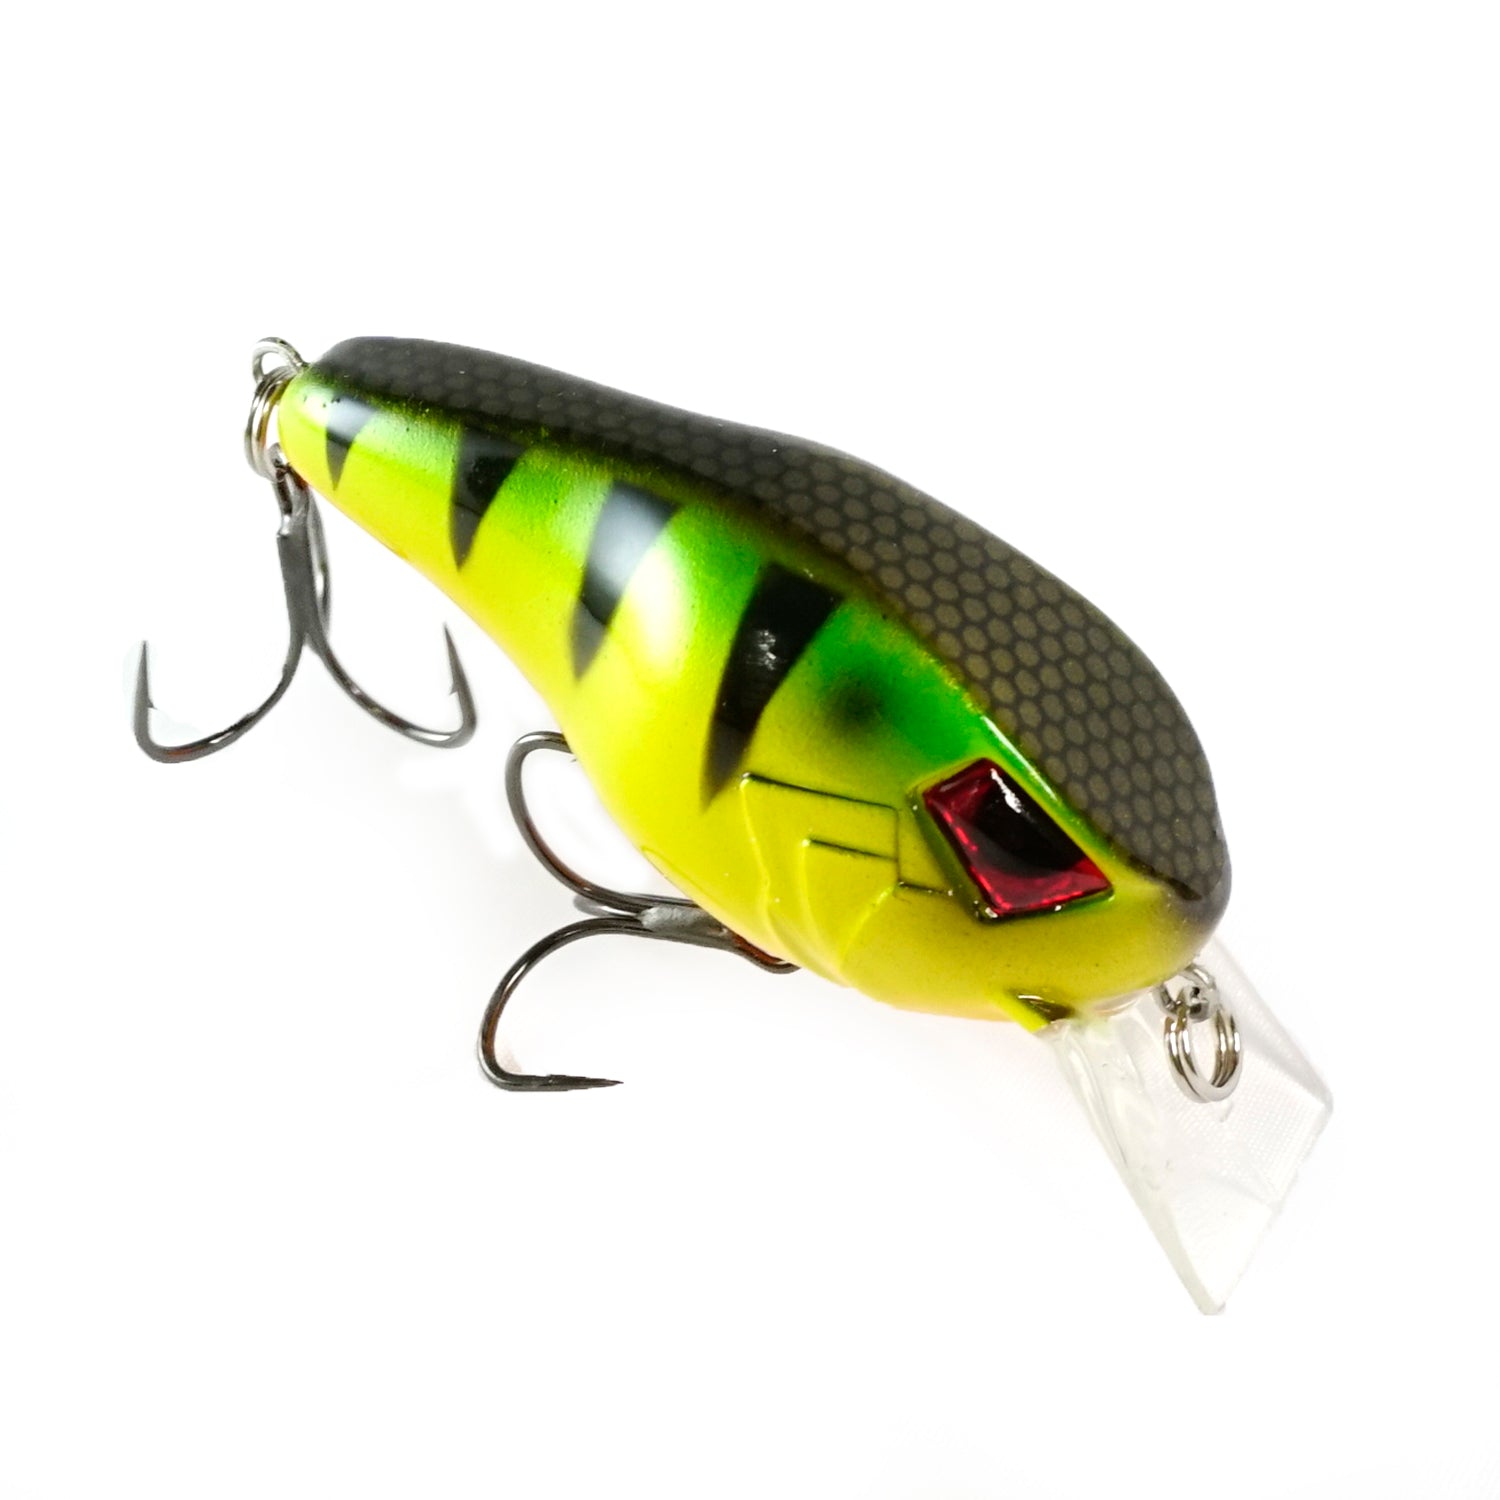 Best Selling Hard Baits – Riot Baits